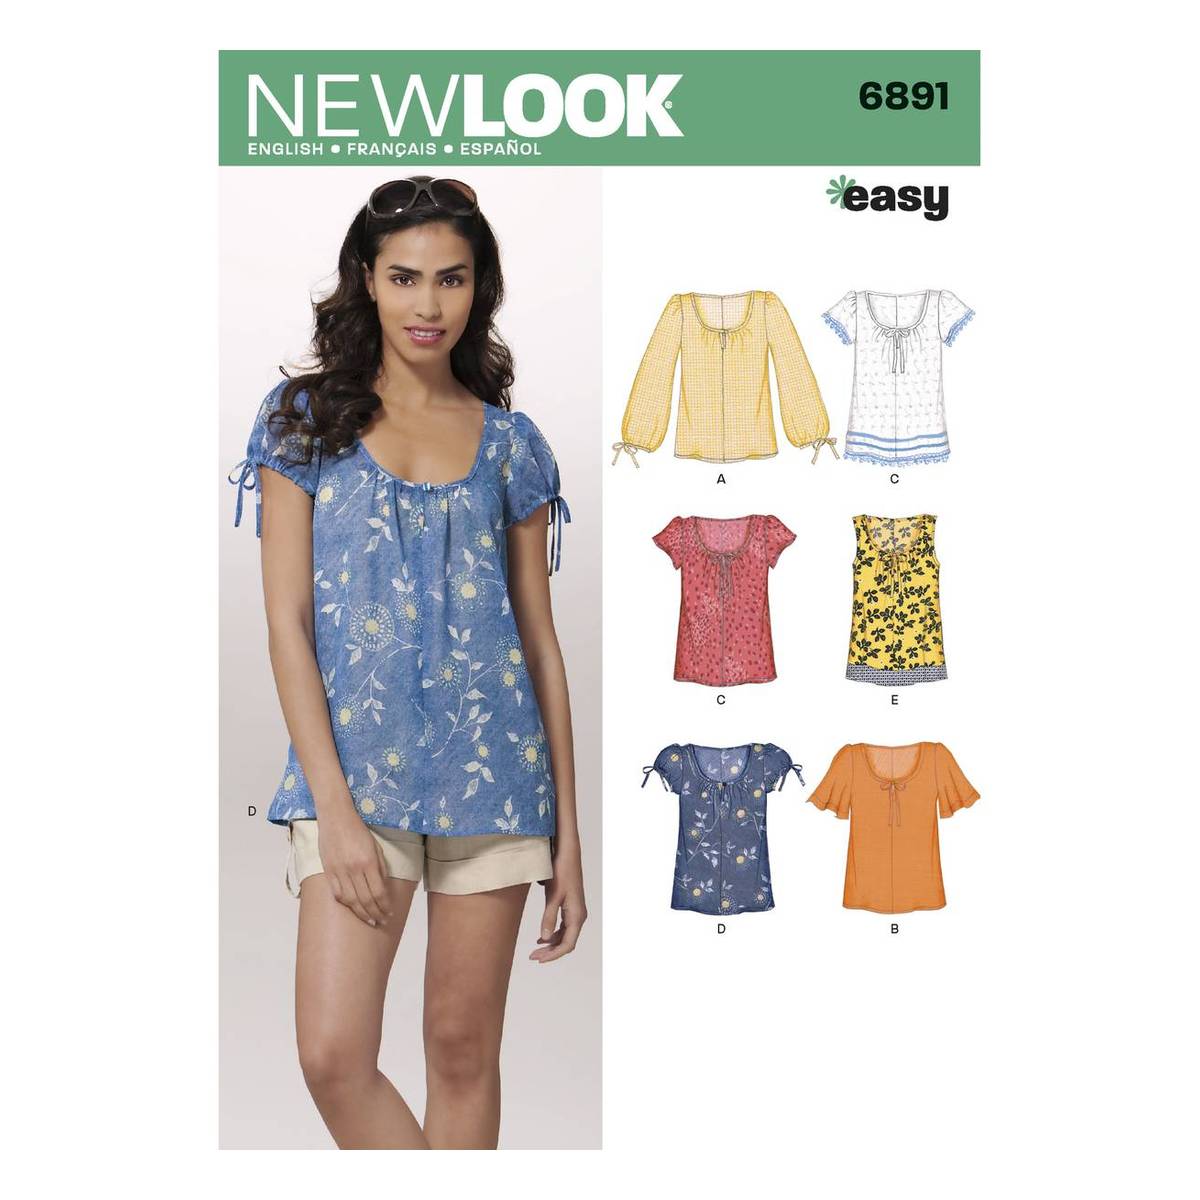 New Look Women's Top Sewing Pattern 6891